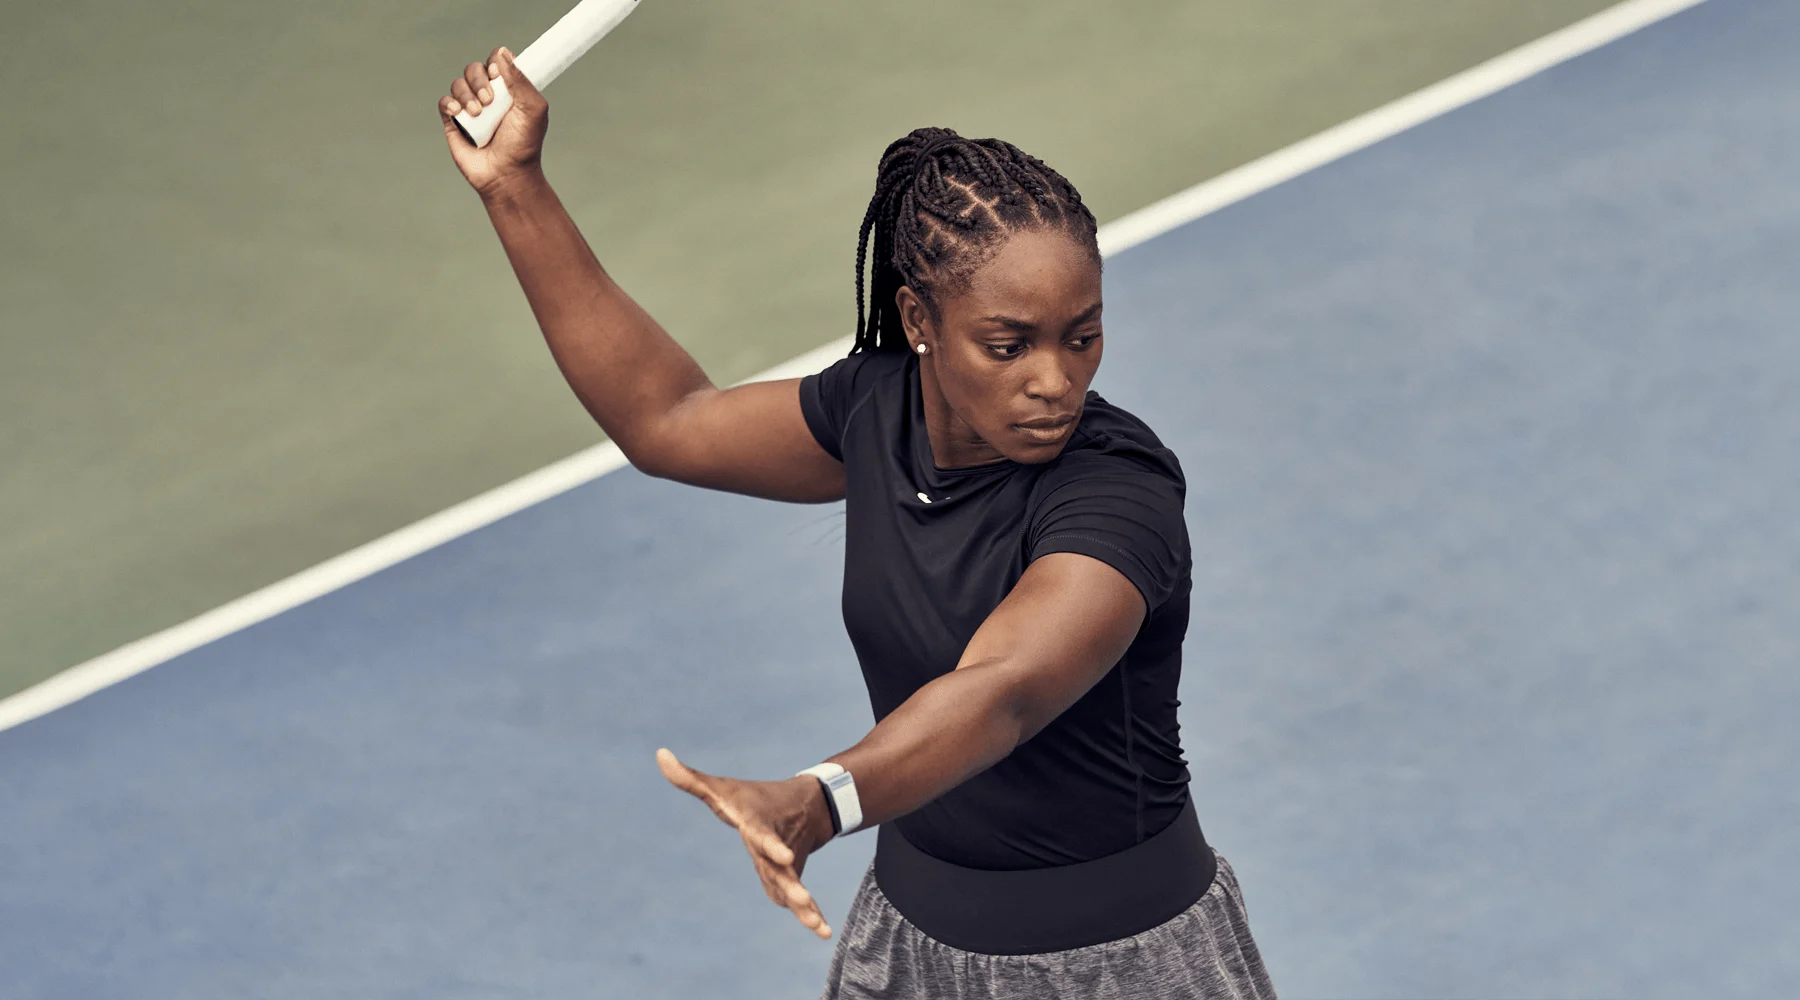 Podcast 173: US Open Champion Sloane Stephens on Tennis &#038; Self-Acceptance